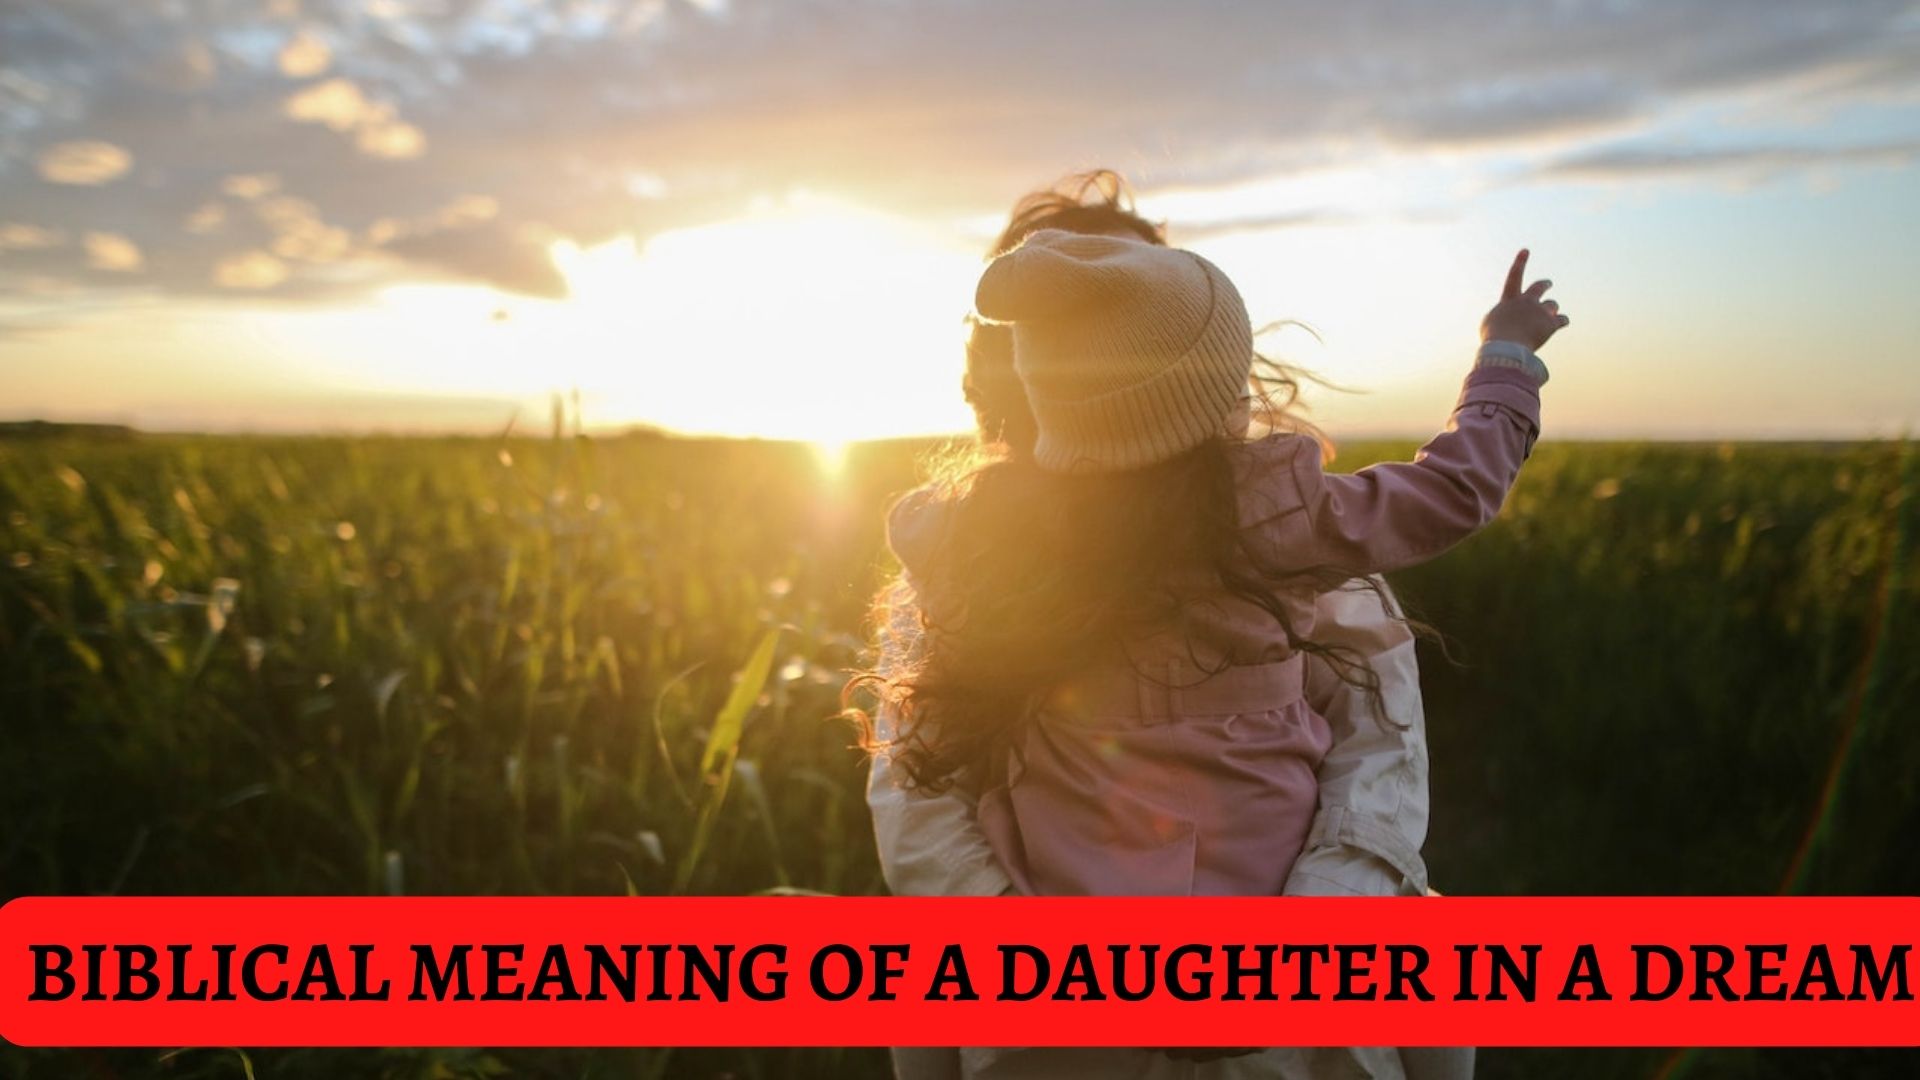 Biblical Meaning Of A Daughter In A Dream - A Symbol Of Youth, Healing, Peace, Beauty, And Purity